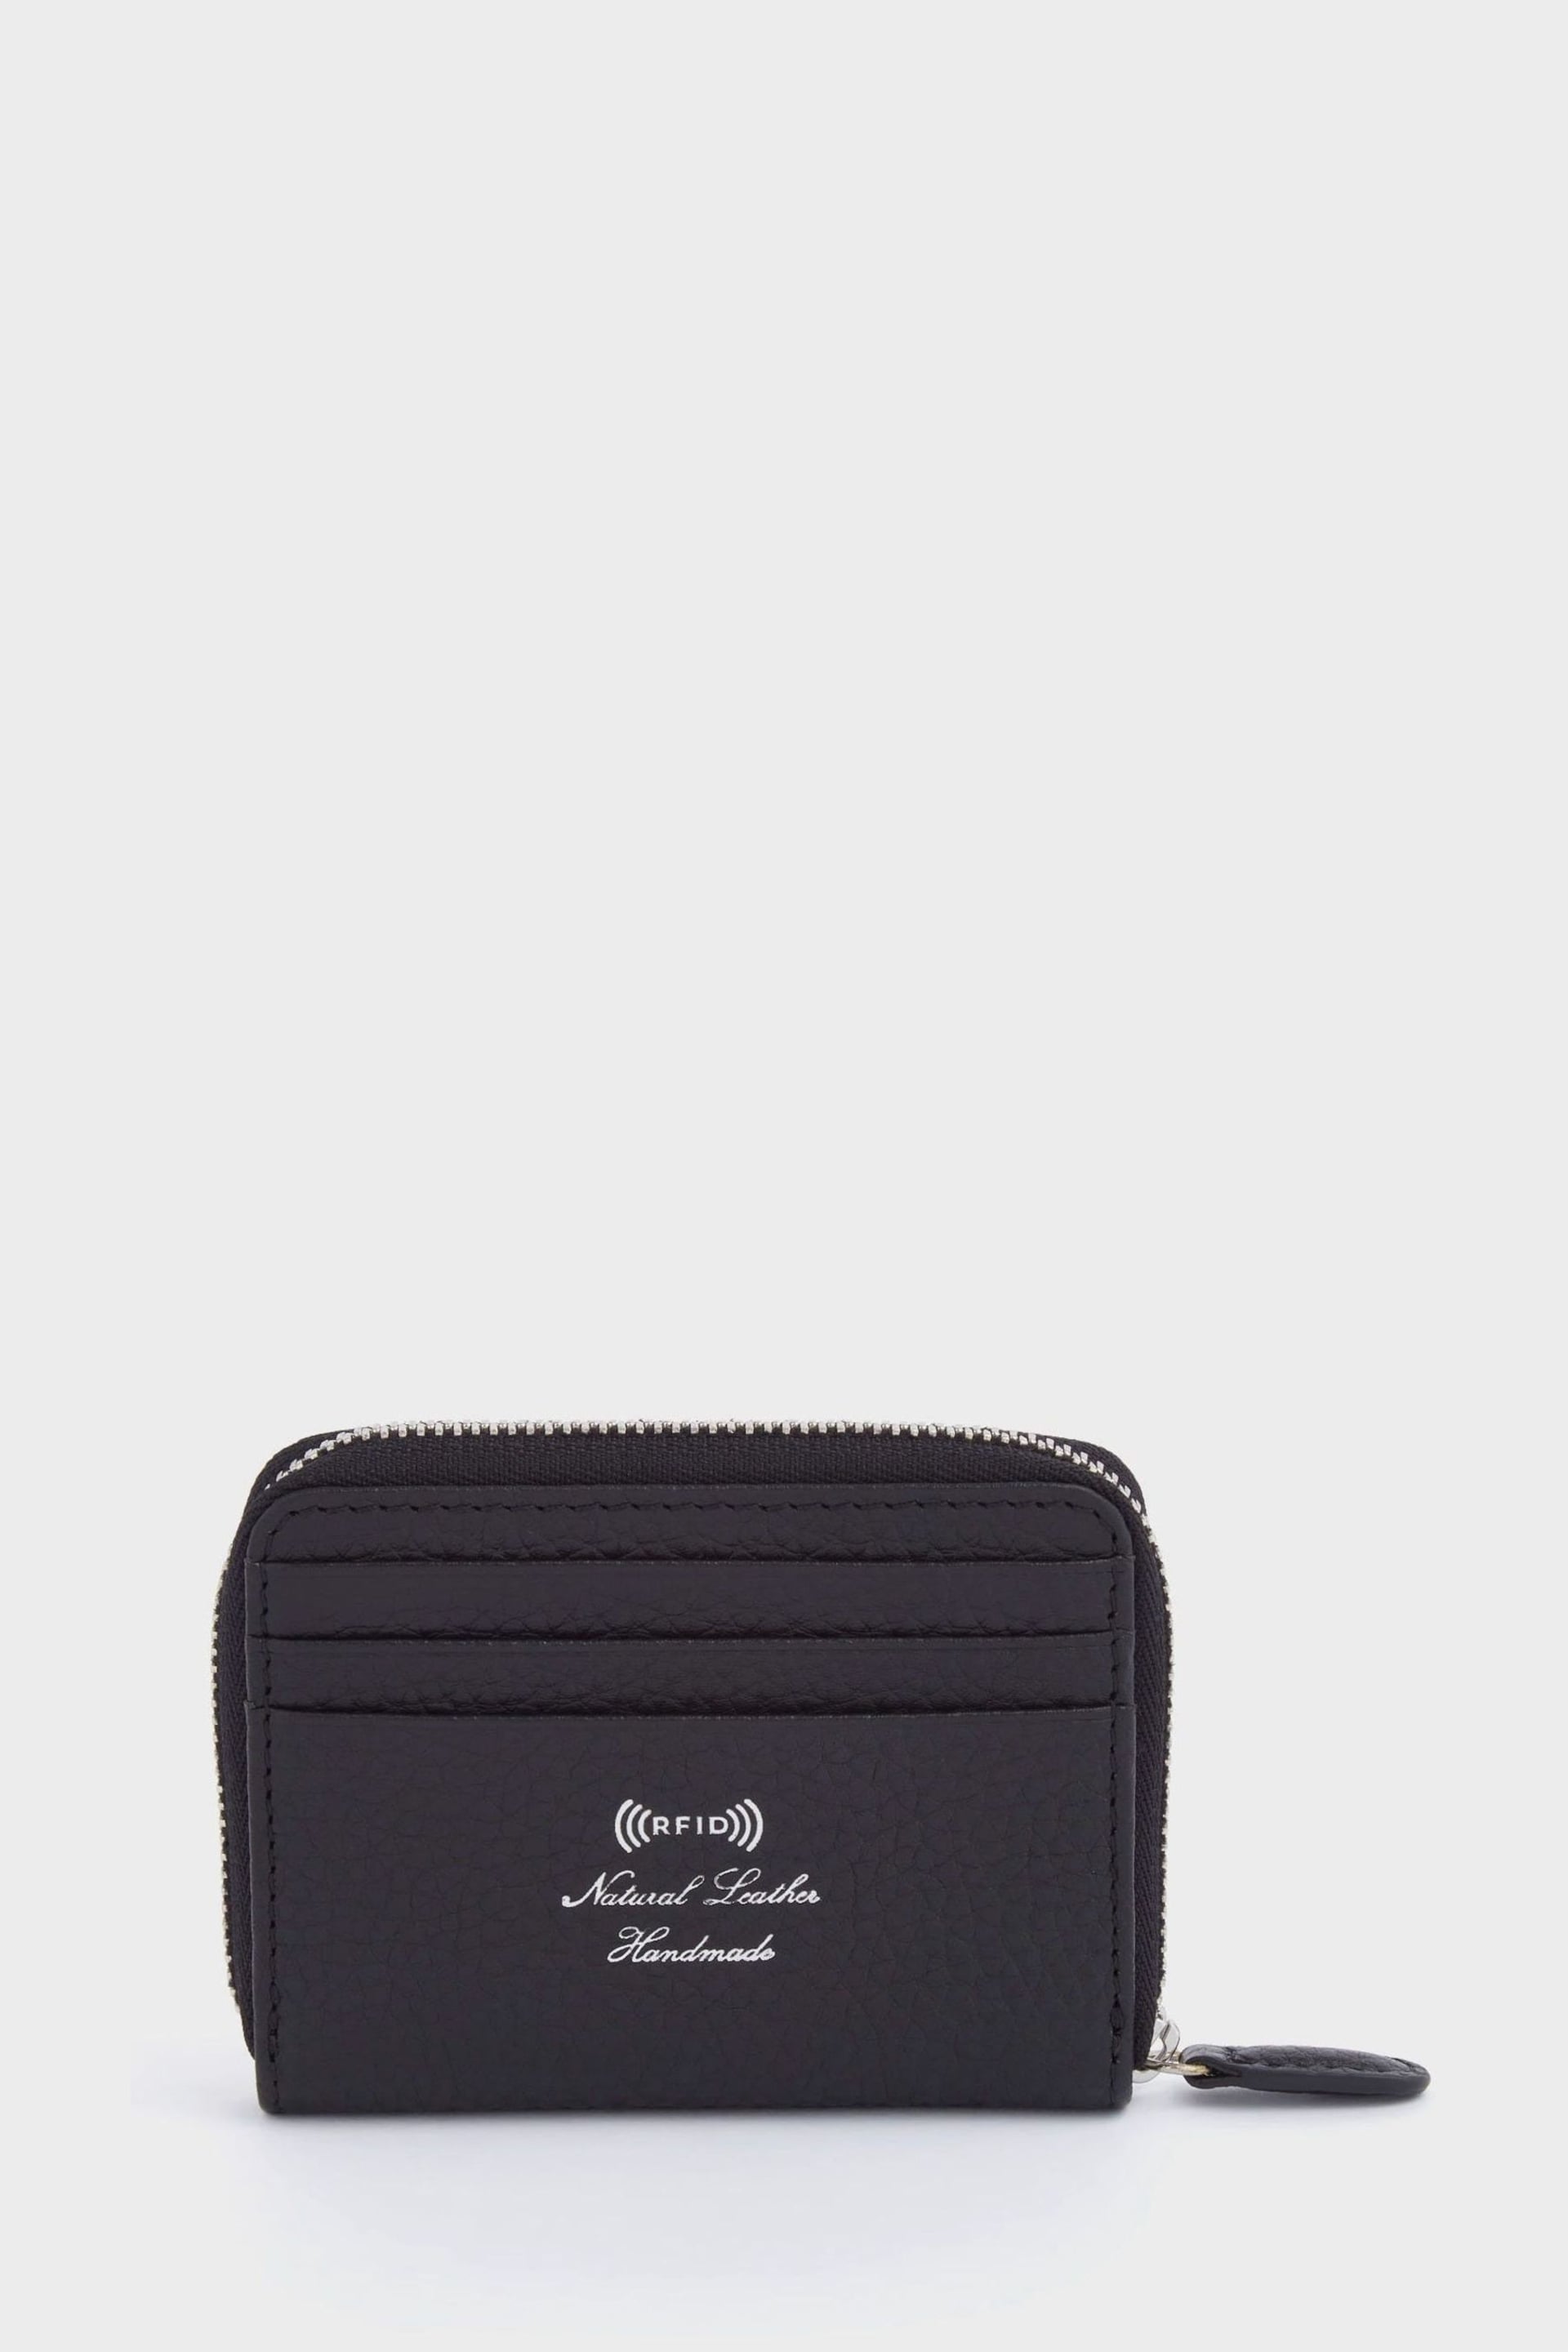 OSPREY LONDON Small The Lyra Leather RFID Zip  Purse - Image 2 of 5